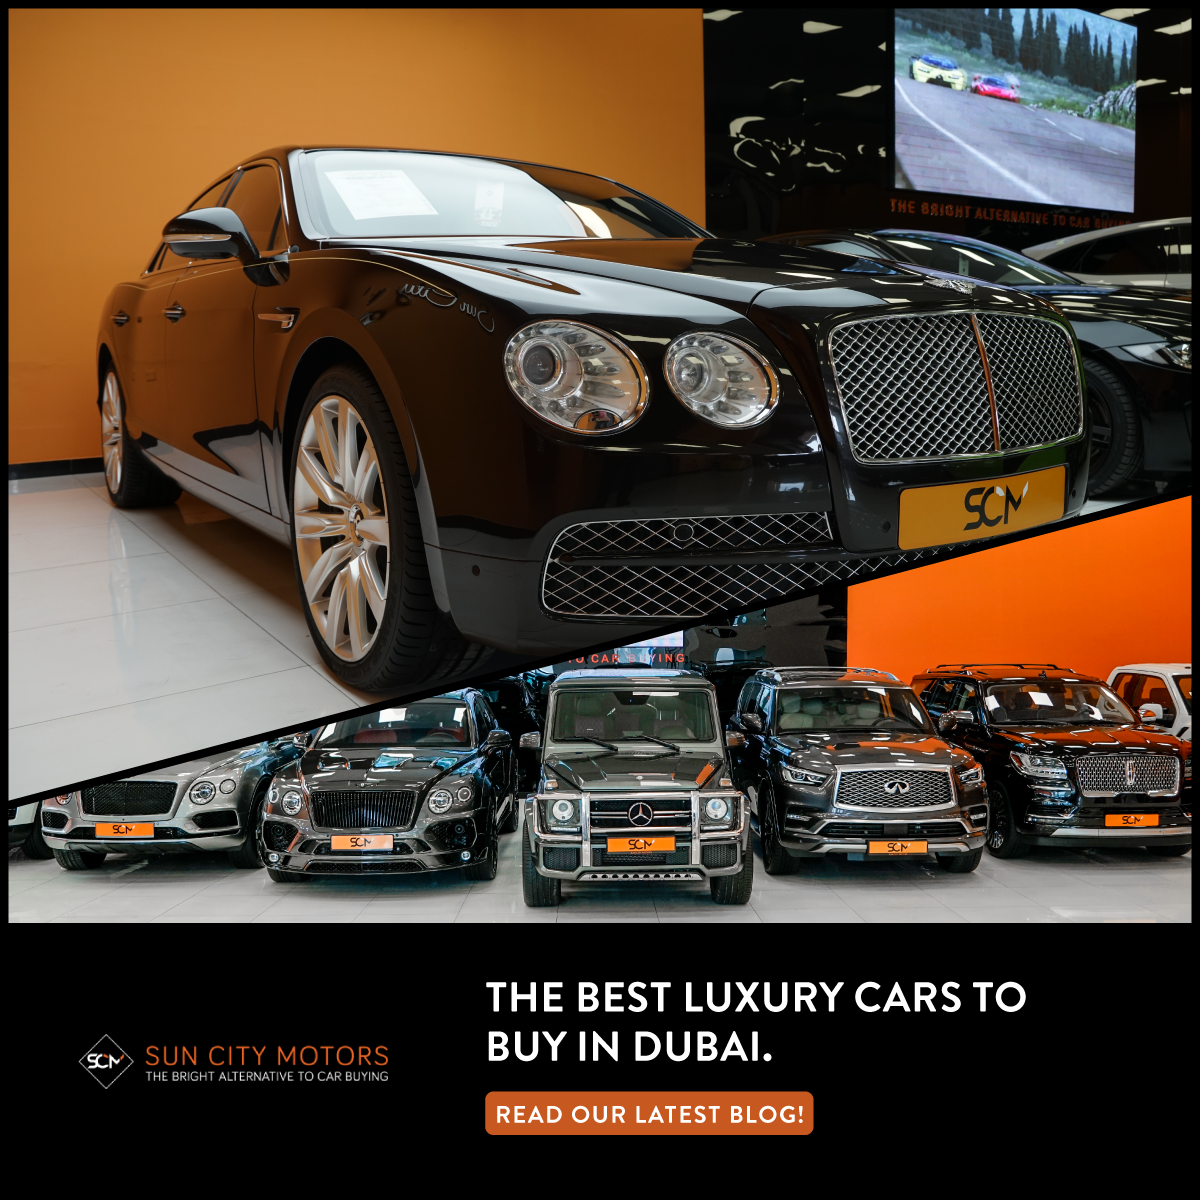 The Best Luxury Cars to Buy in Dubai